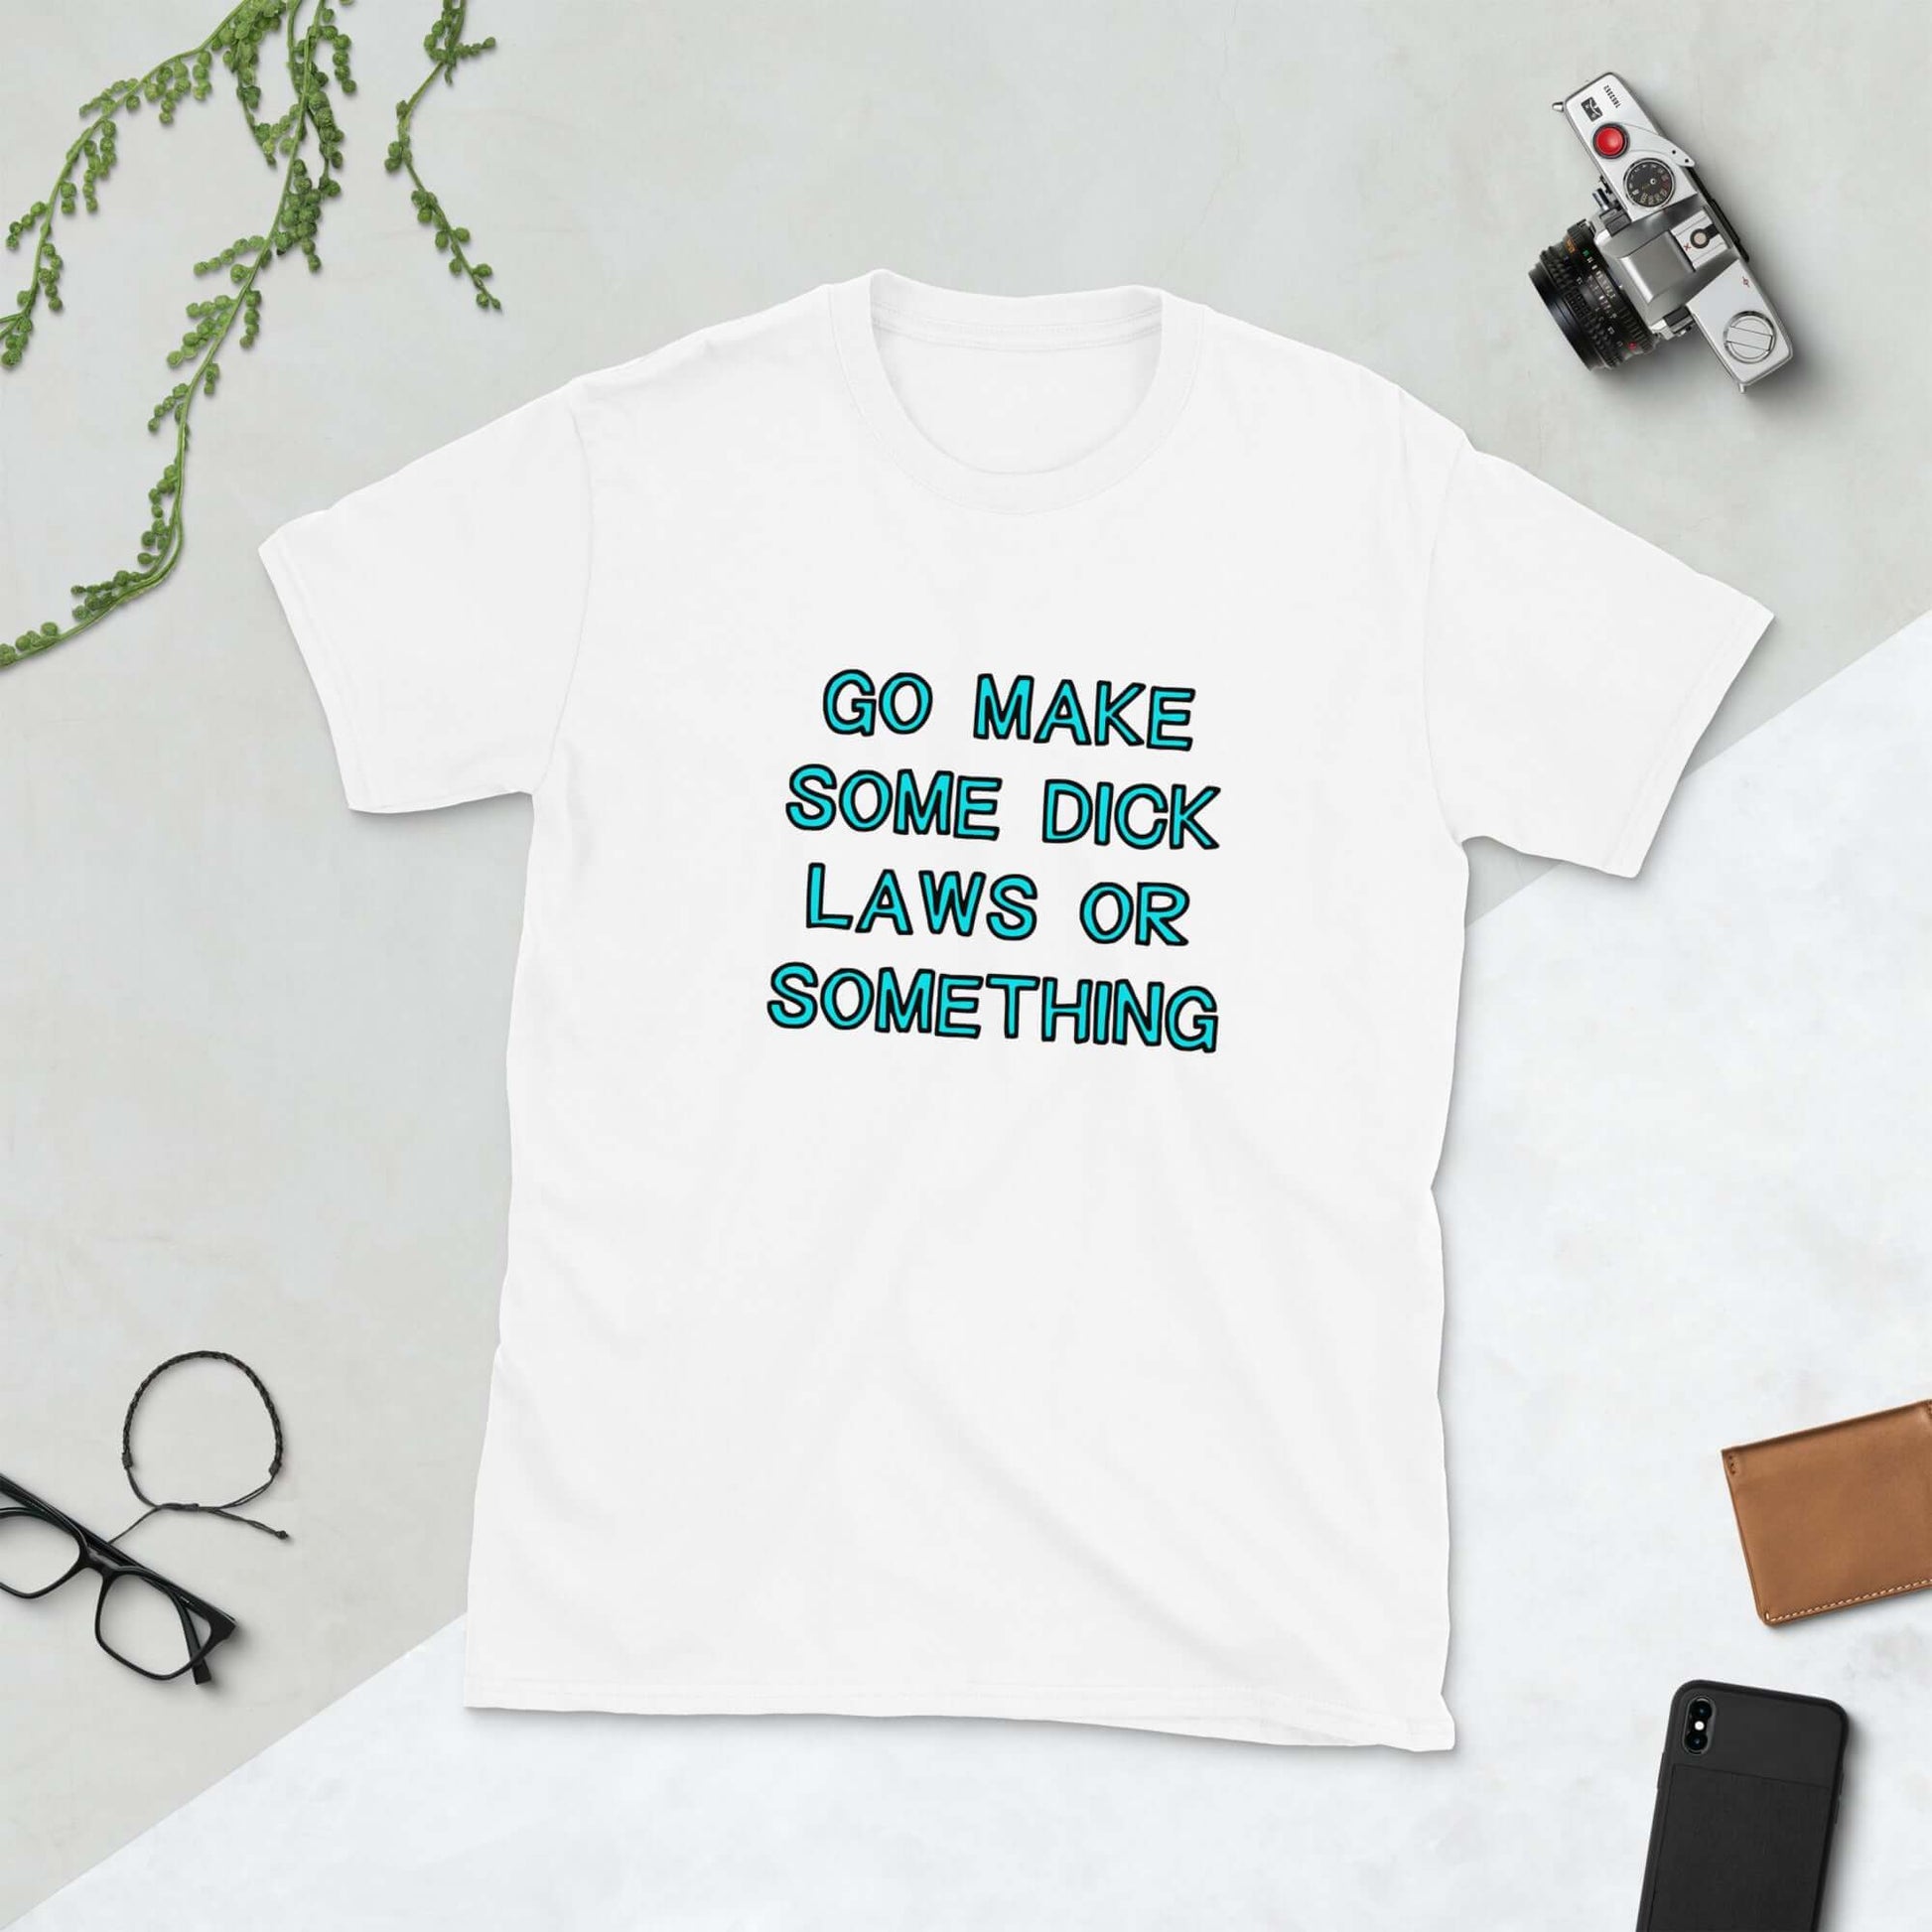 White t-shirt with the words Go make some dick laws or something printed on the front. The text is turquoise with black outline.